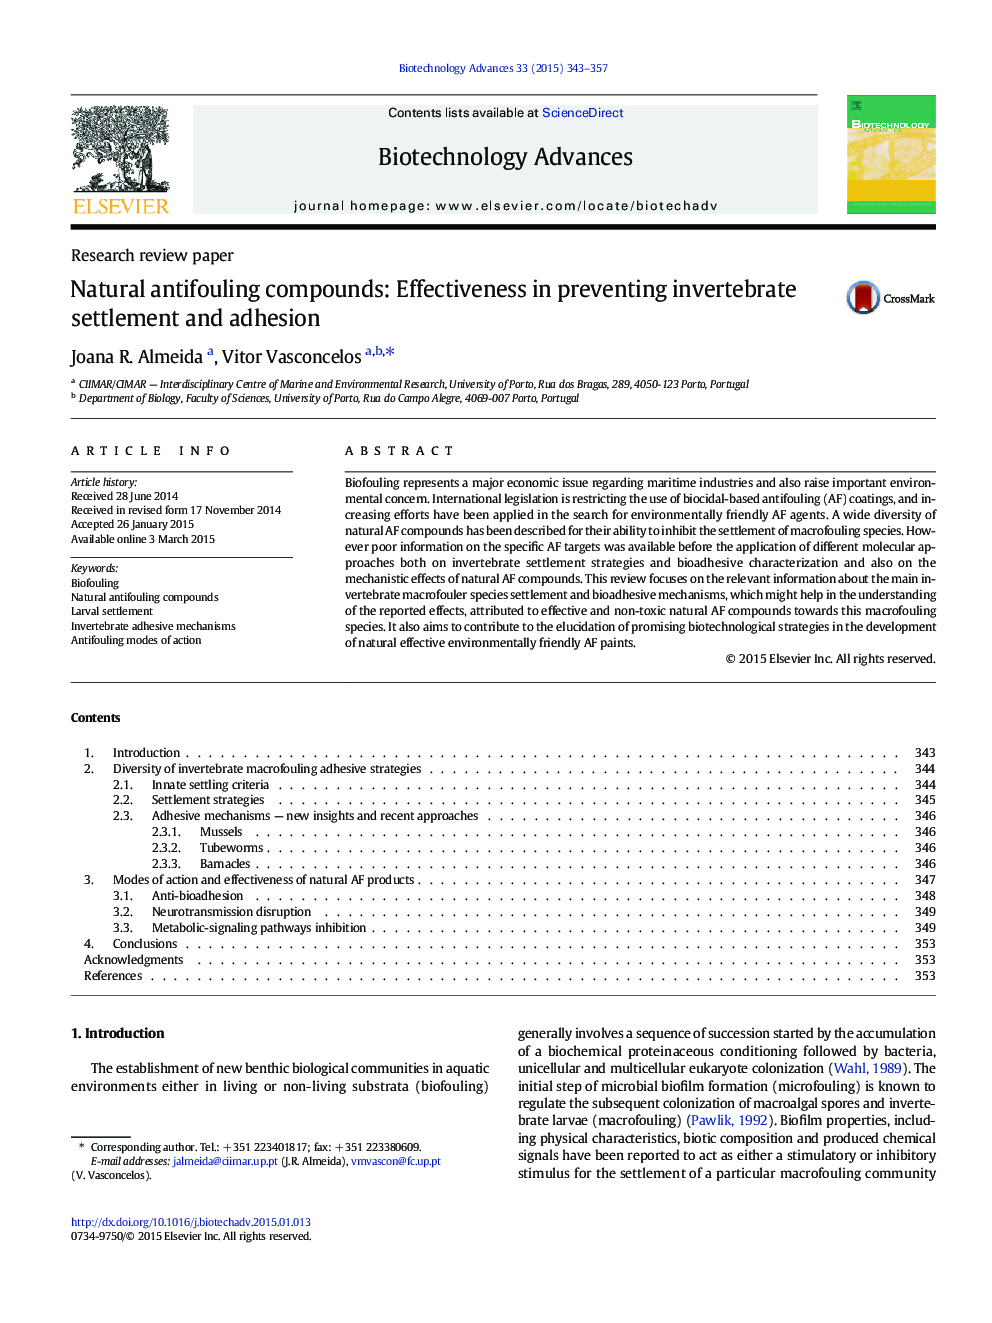 Natural antifouling compounds: Effectiveness in preventing invertebrate settlement and adhesion